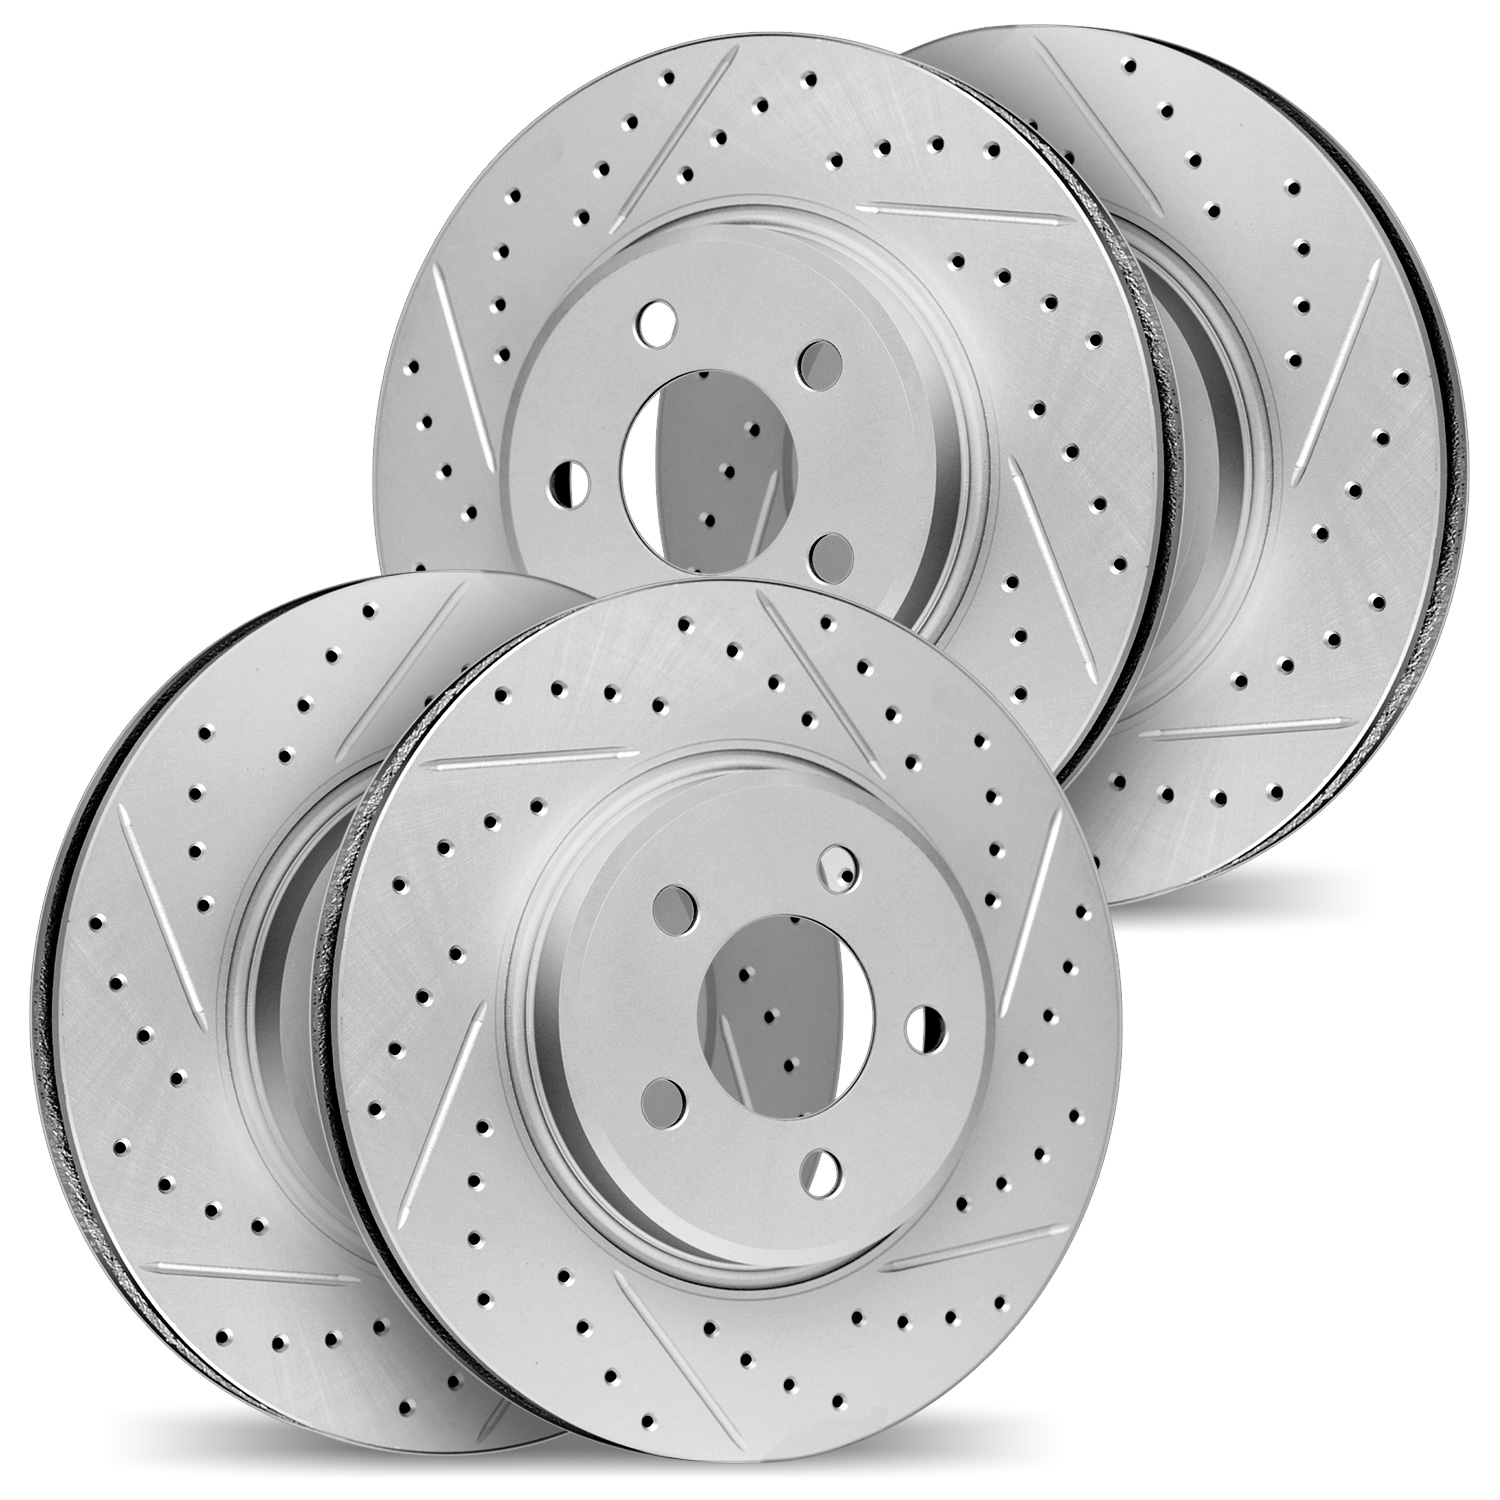 2004-31000 Geoperformance Drilled/Slotted Brake Rotors, 2012-2020 BMW, Position: Front and Rear